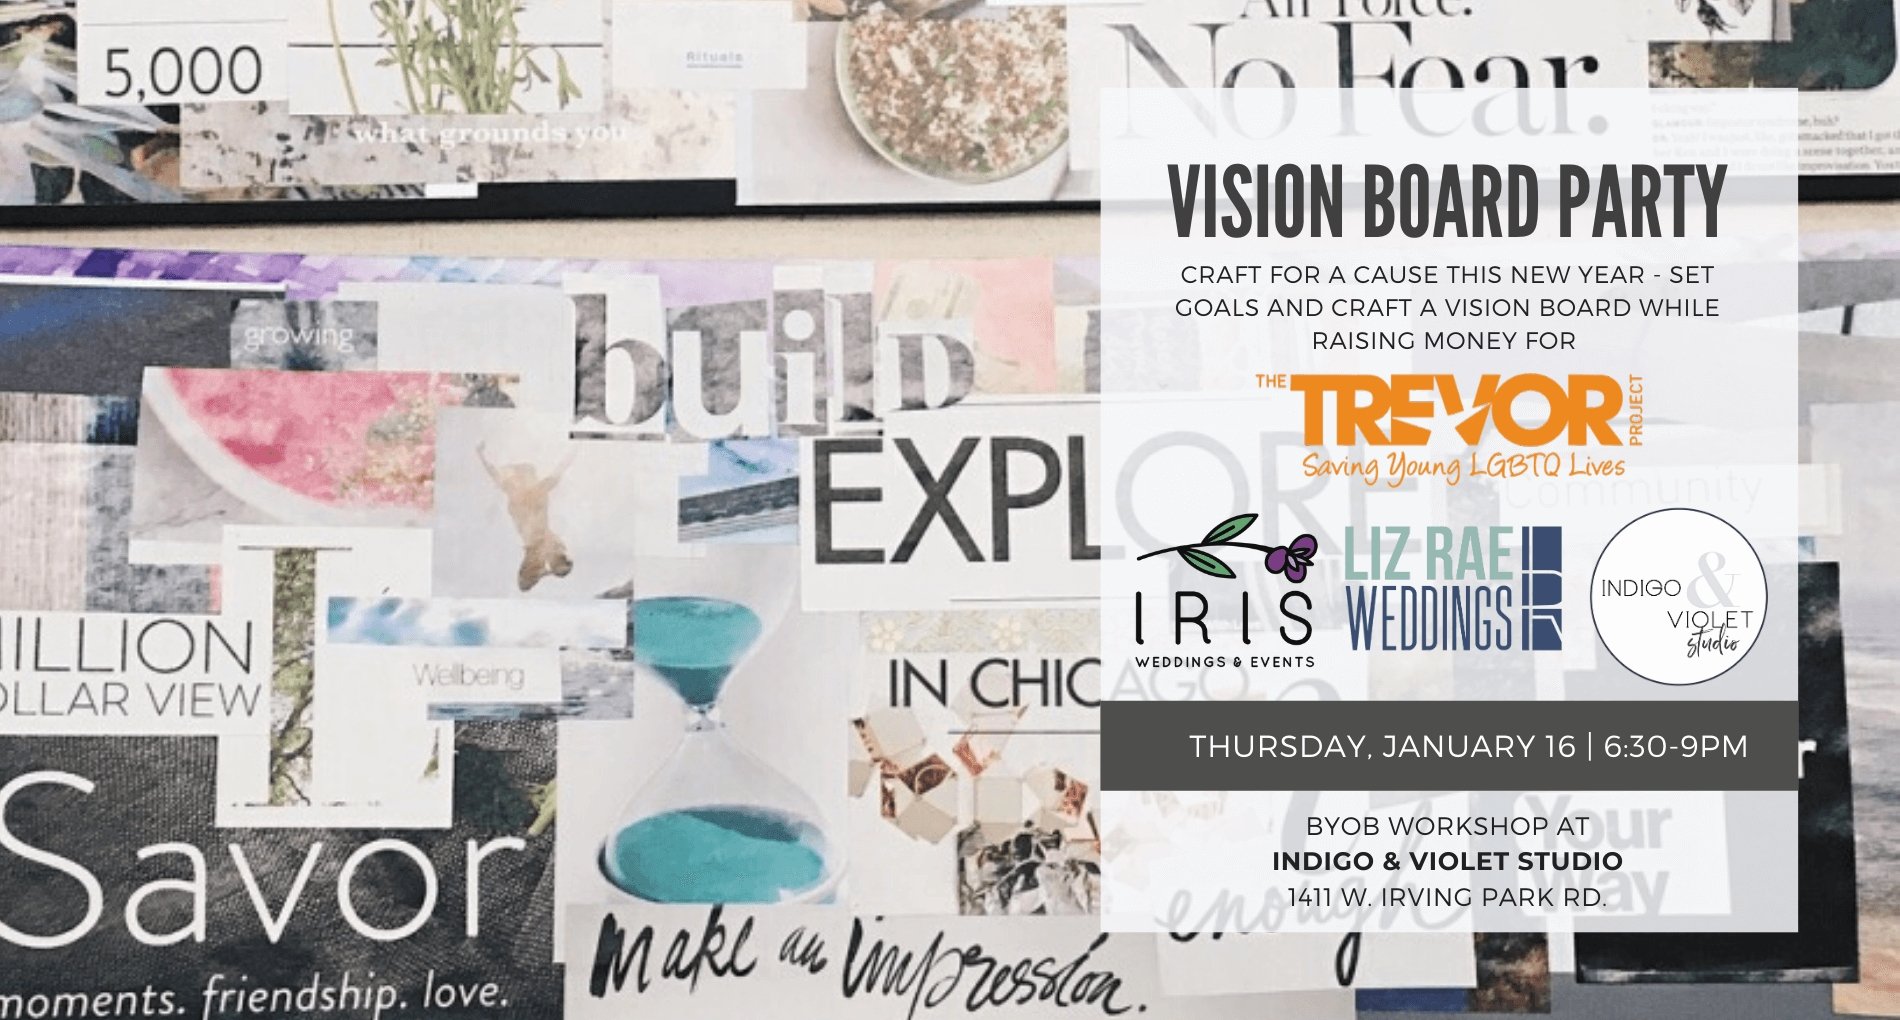 Discover Vision Board Events & Activities in Online